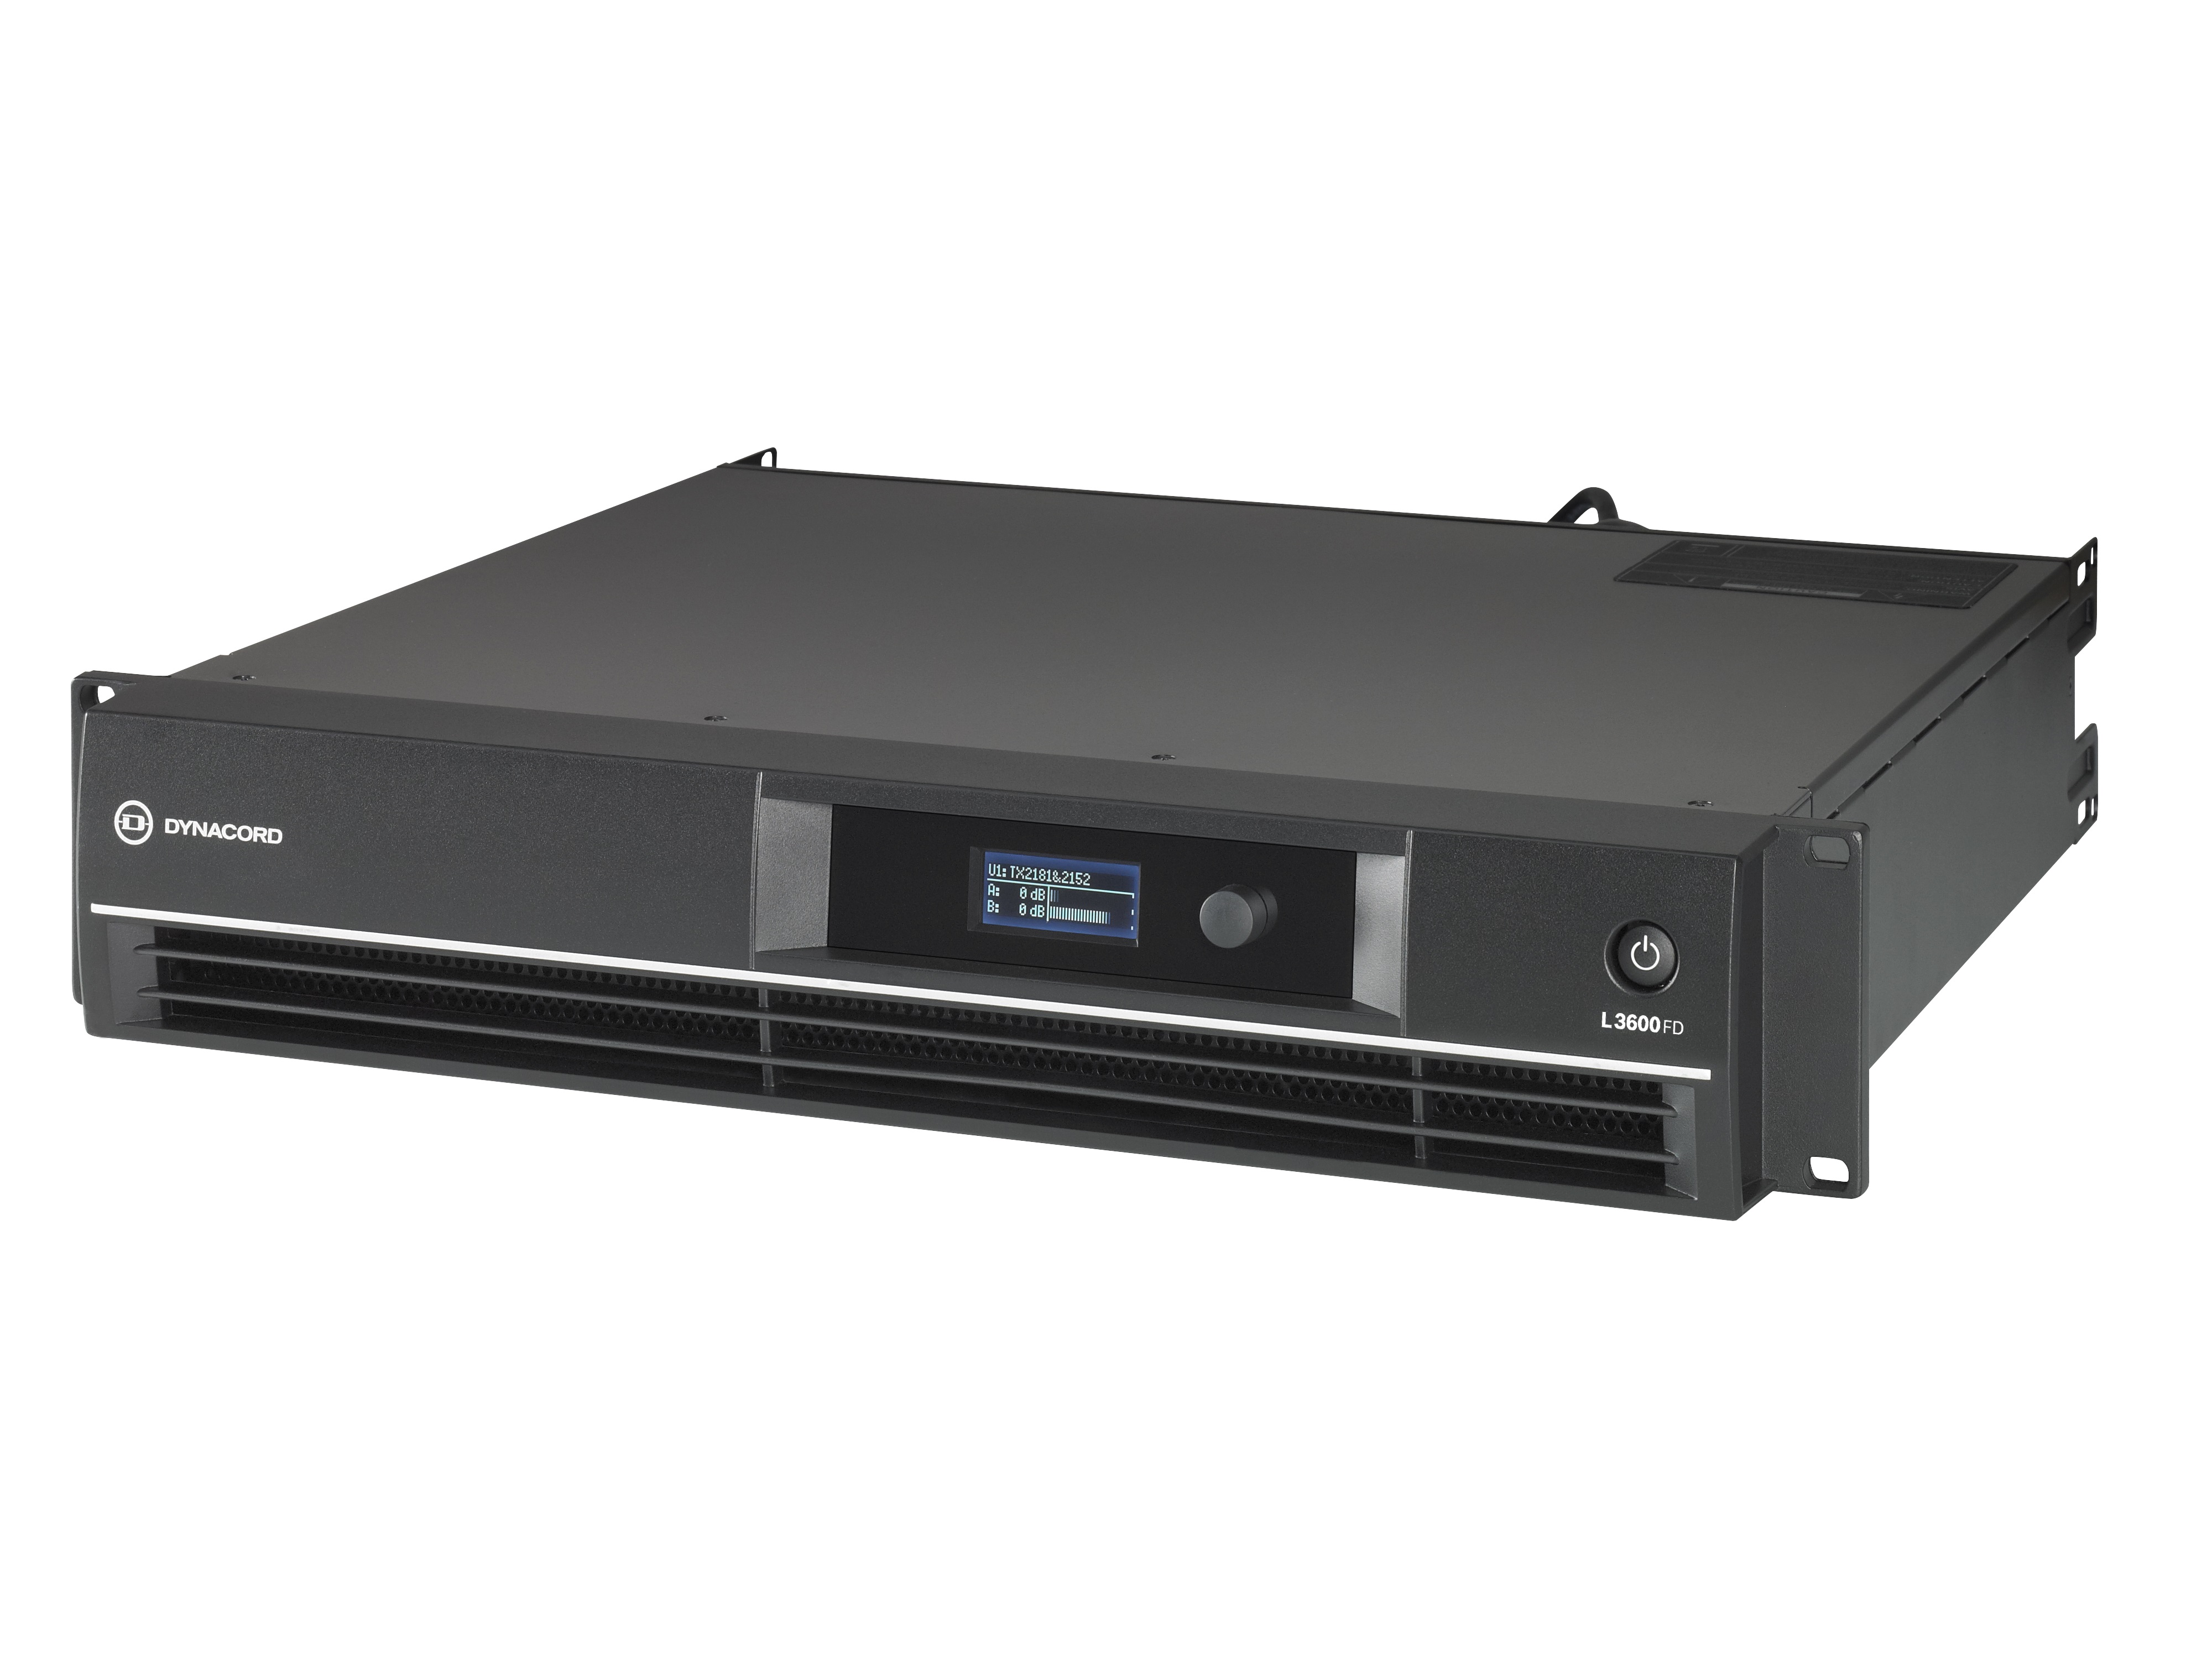 L3600FD-US DSP Power Amplifier 2x1800W with FIR Drive/XLR/NL4 Connectors by Dynacord